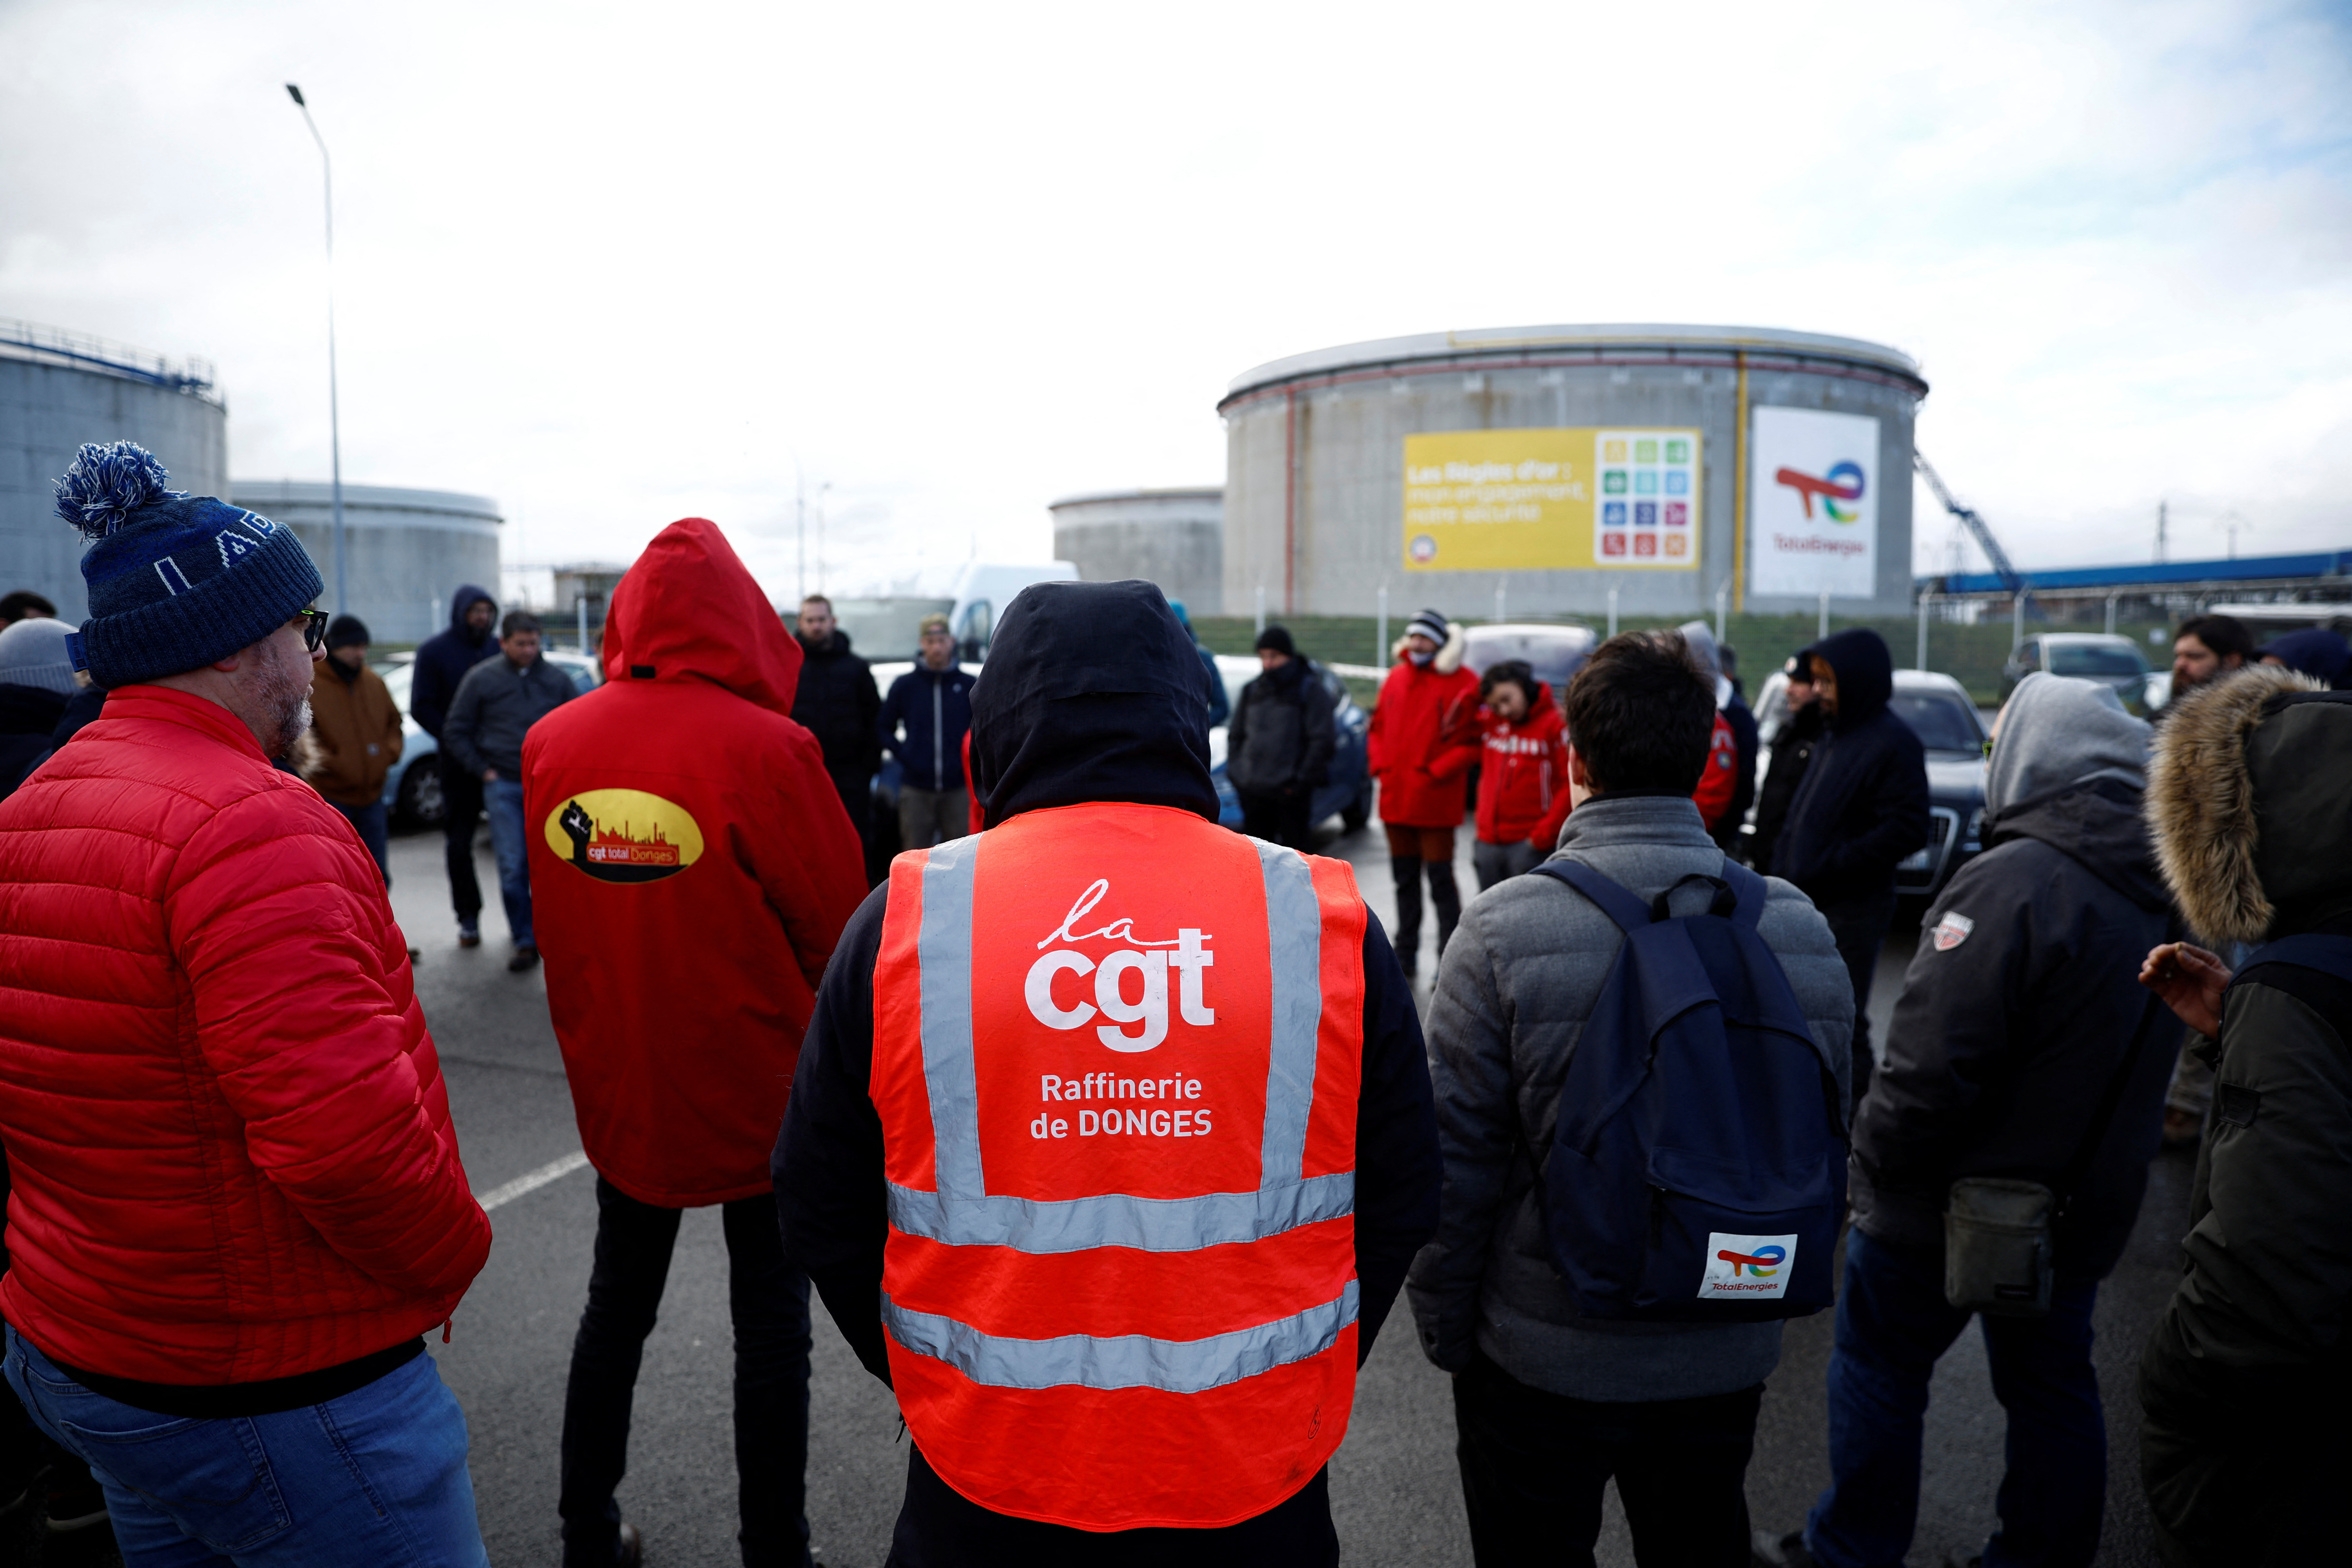 French energy workers gather in front of the French oil giant TotalEnergies refinery in Donges